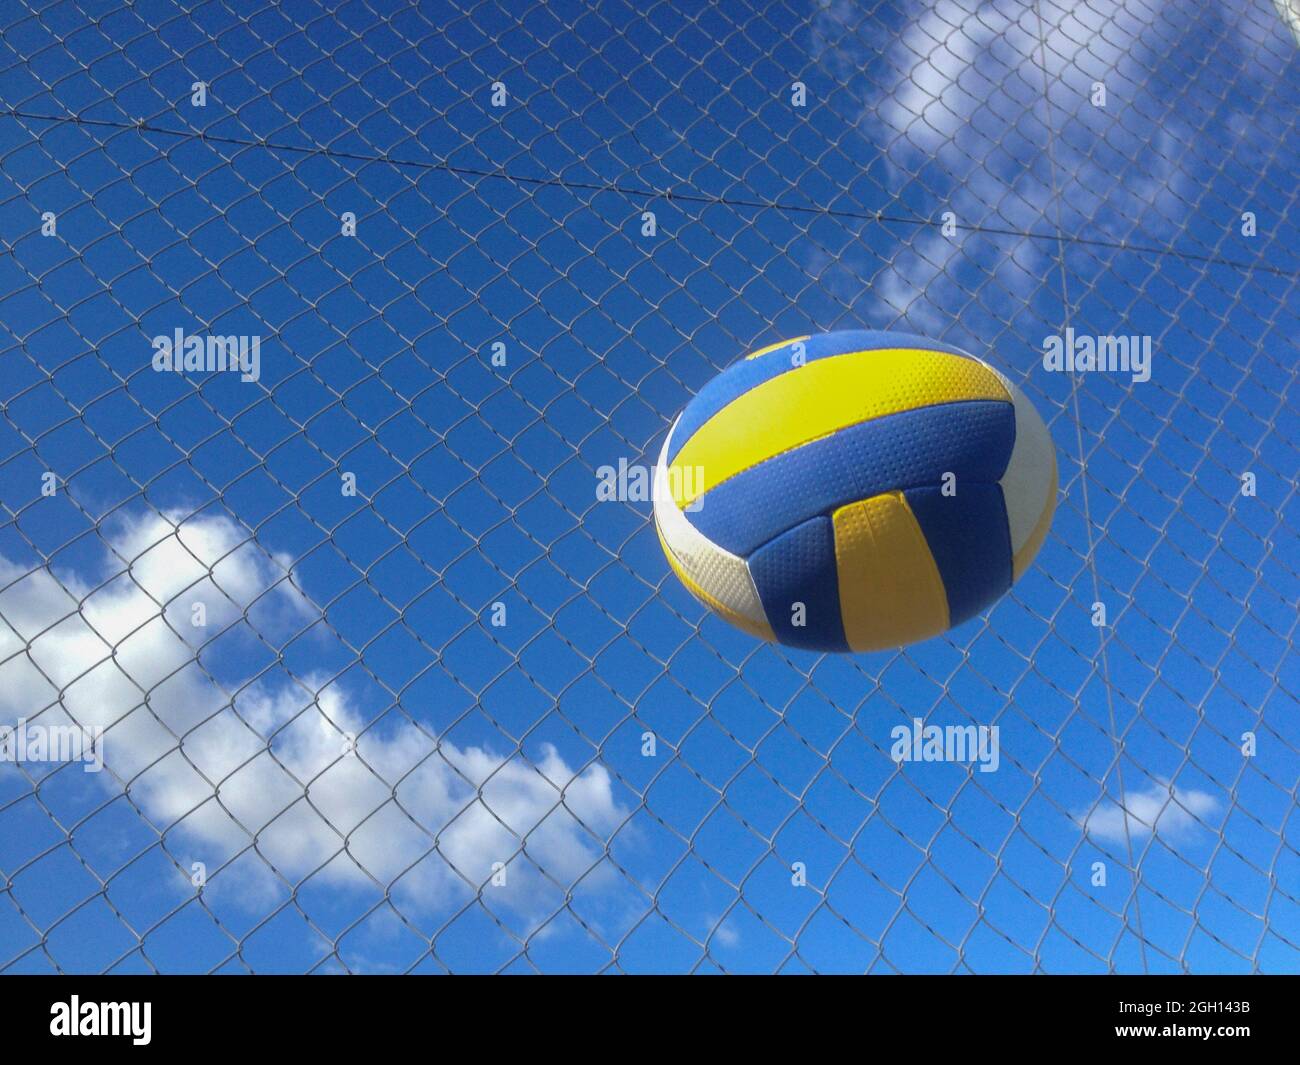 Volleyball ball in the air over wire fence background. Motion deformated object. Stock Photo